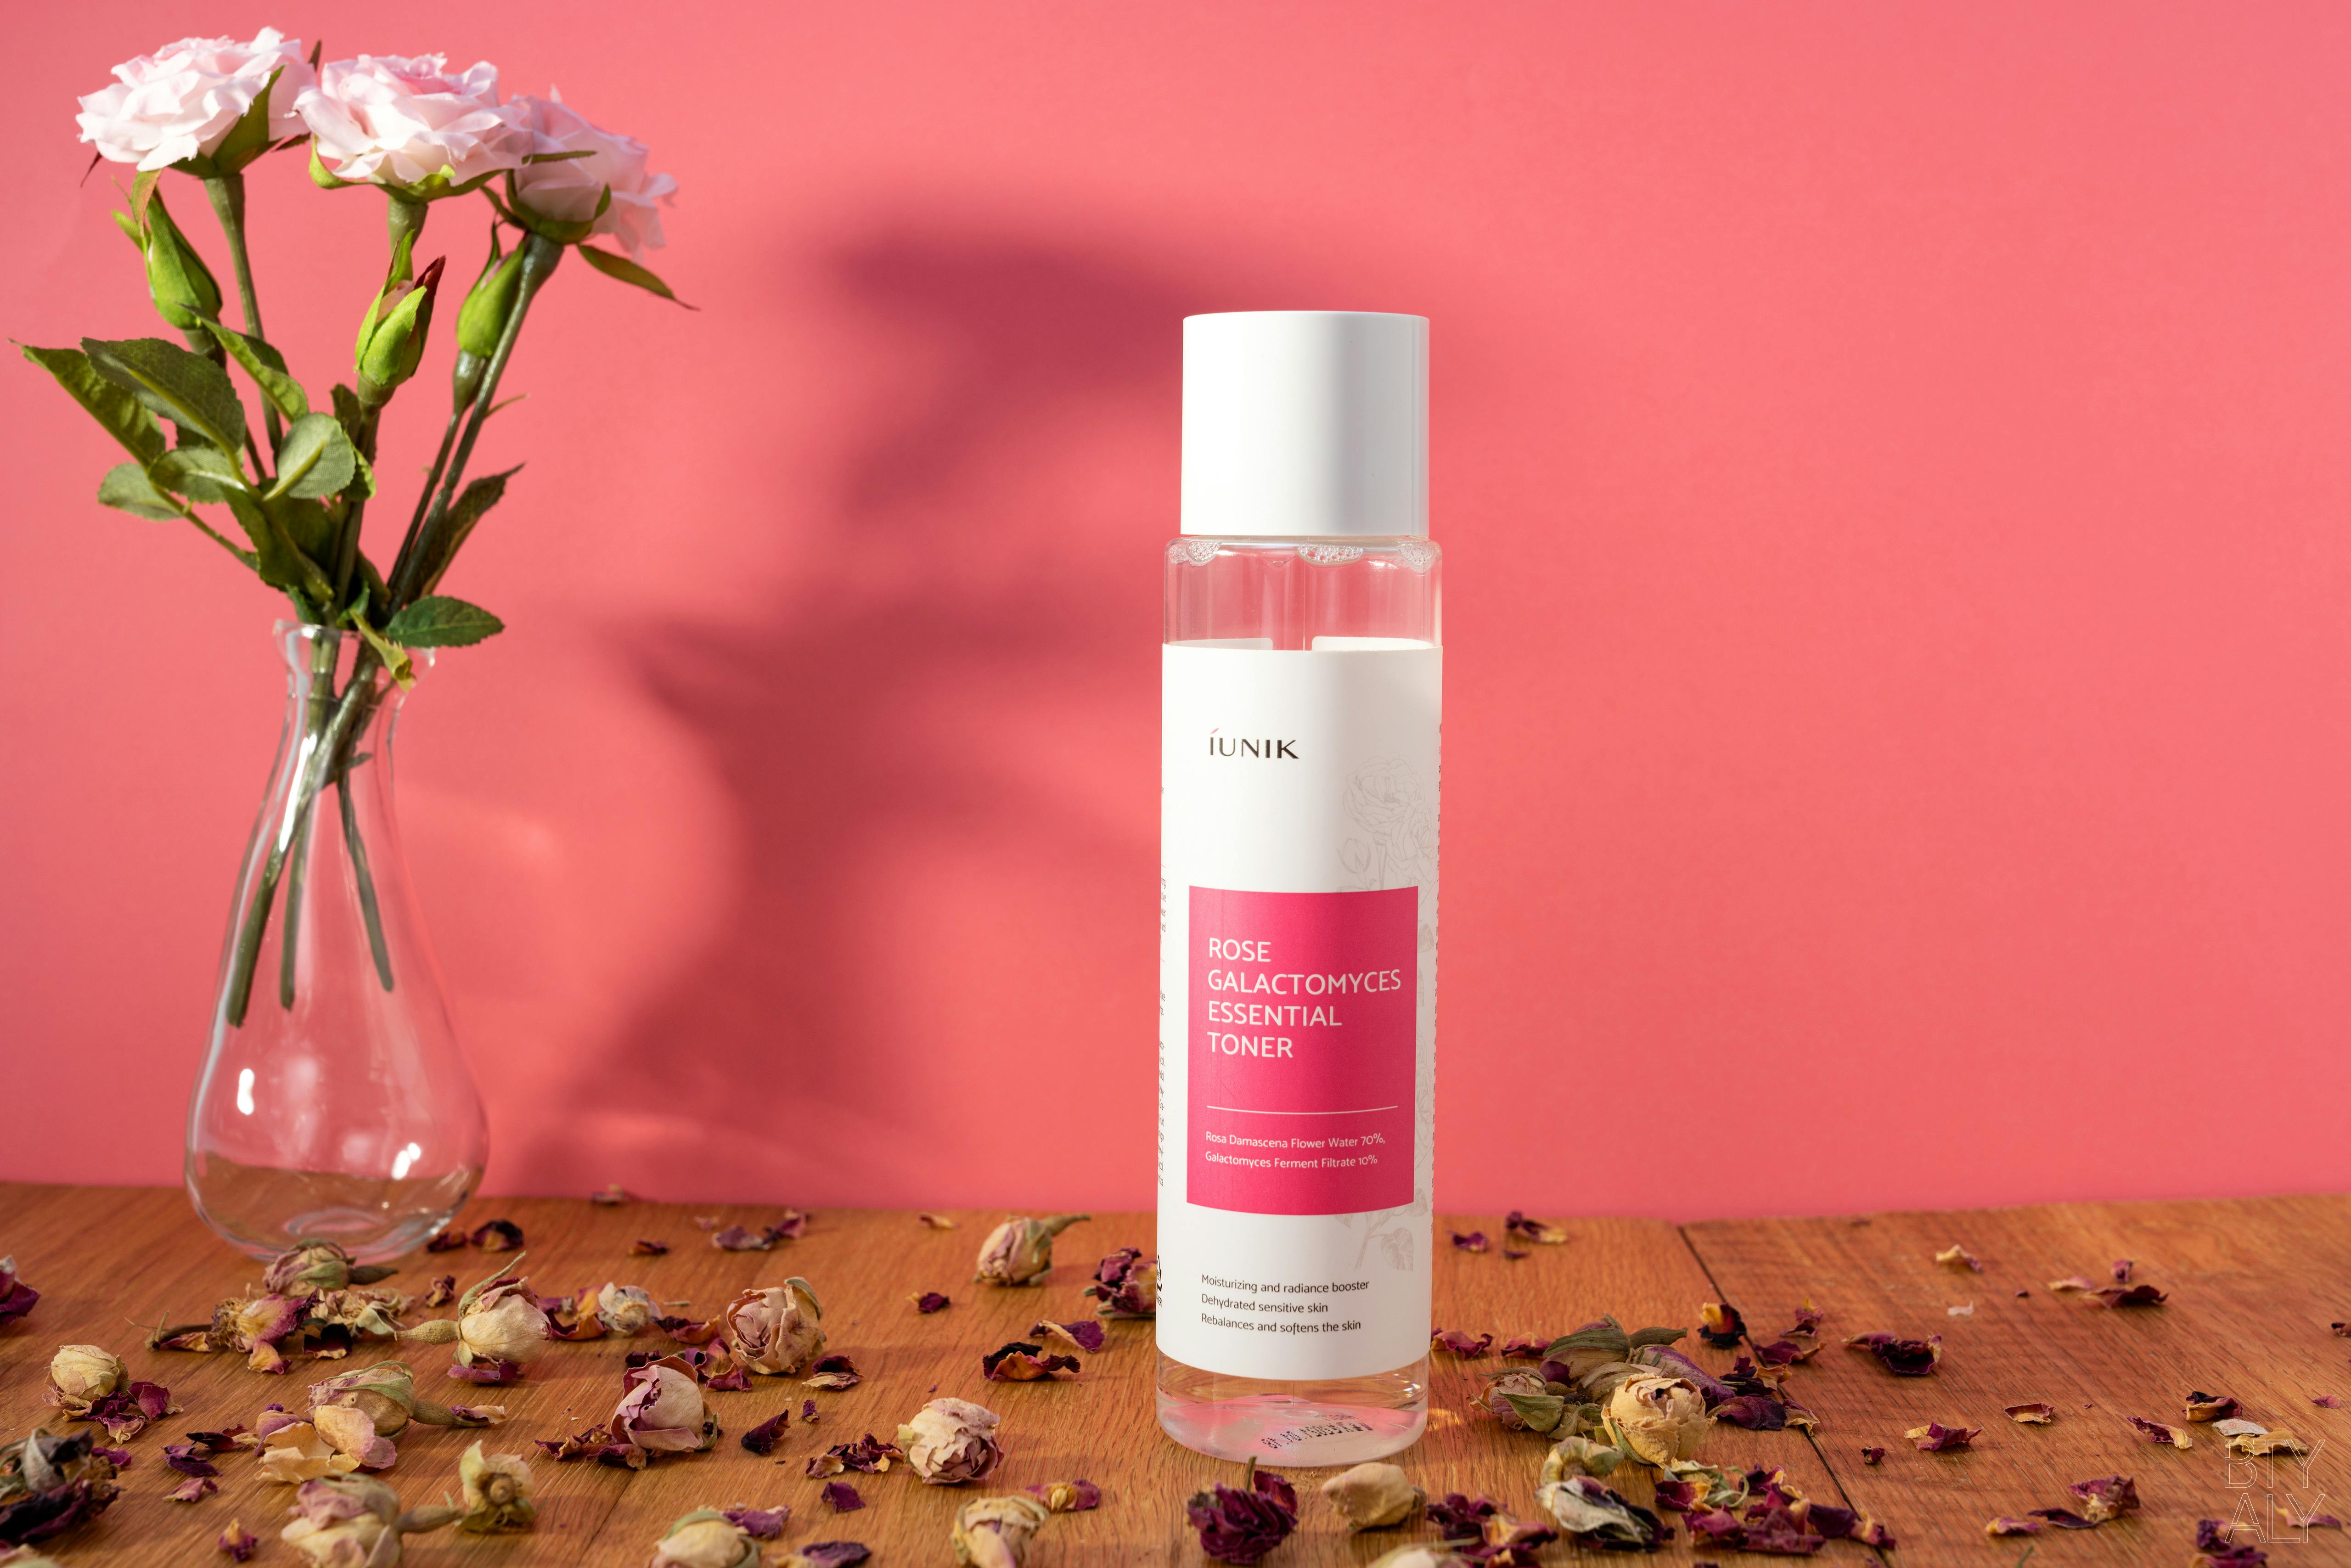 Astrolabe mave kom over Review: iUNIK Rose Galactomyces Essential Toner | BTY ALY